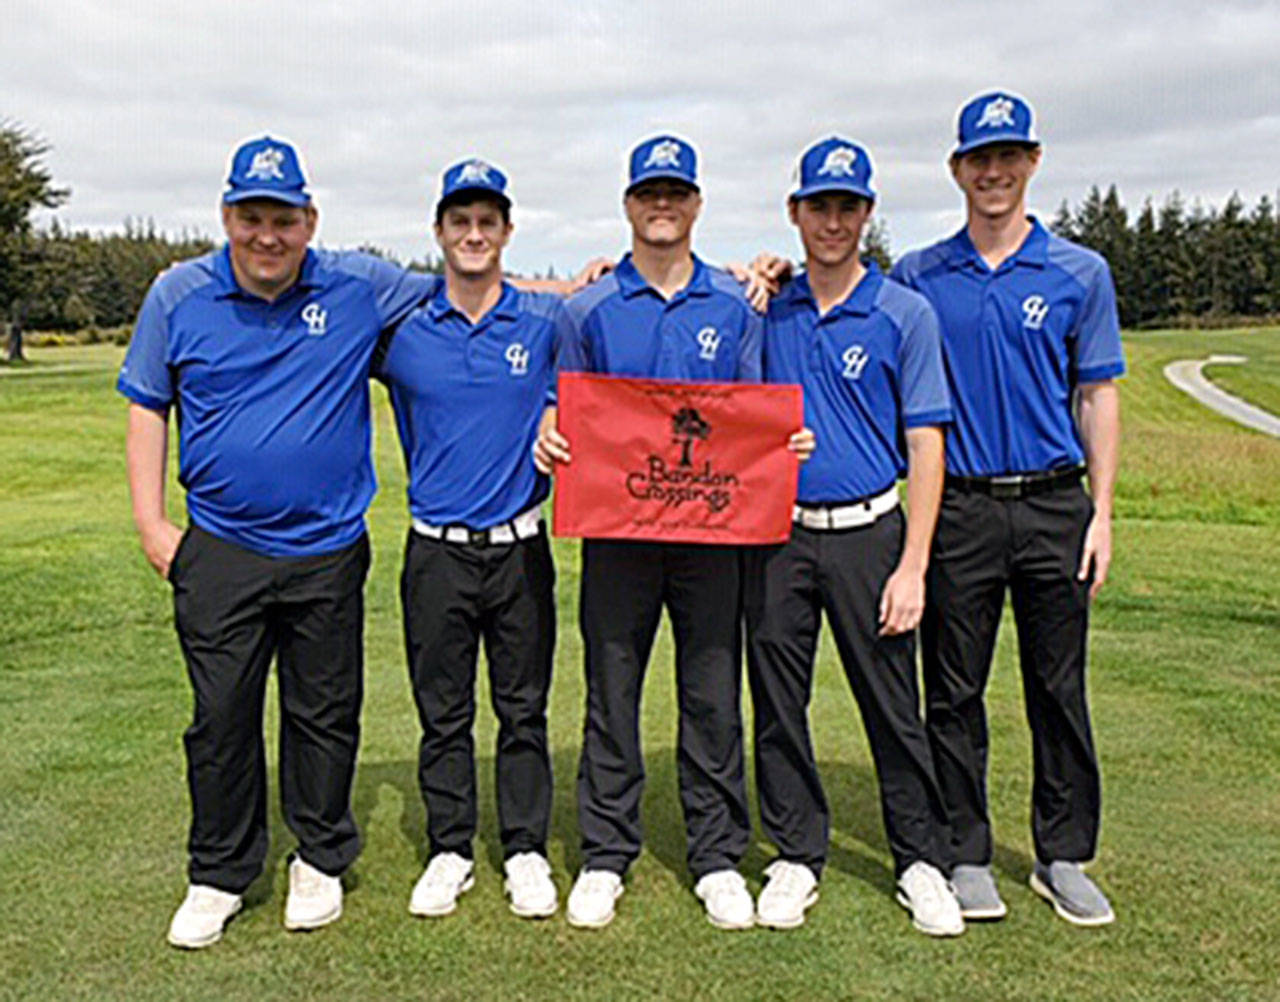 The Grays Harbor College men’s golf team, seen here after winning the SWOCC Invitational on May 13 in Bandon, Ore., placed fourth at the NWAC Championshps on Monday in DuPont. From left are Ryan Feyrer, Tim Nail, captain Dylan Christoffer, Cooper Benfield and Travis Bossio. (Submitted photo)